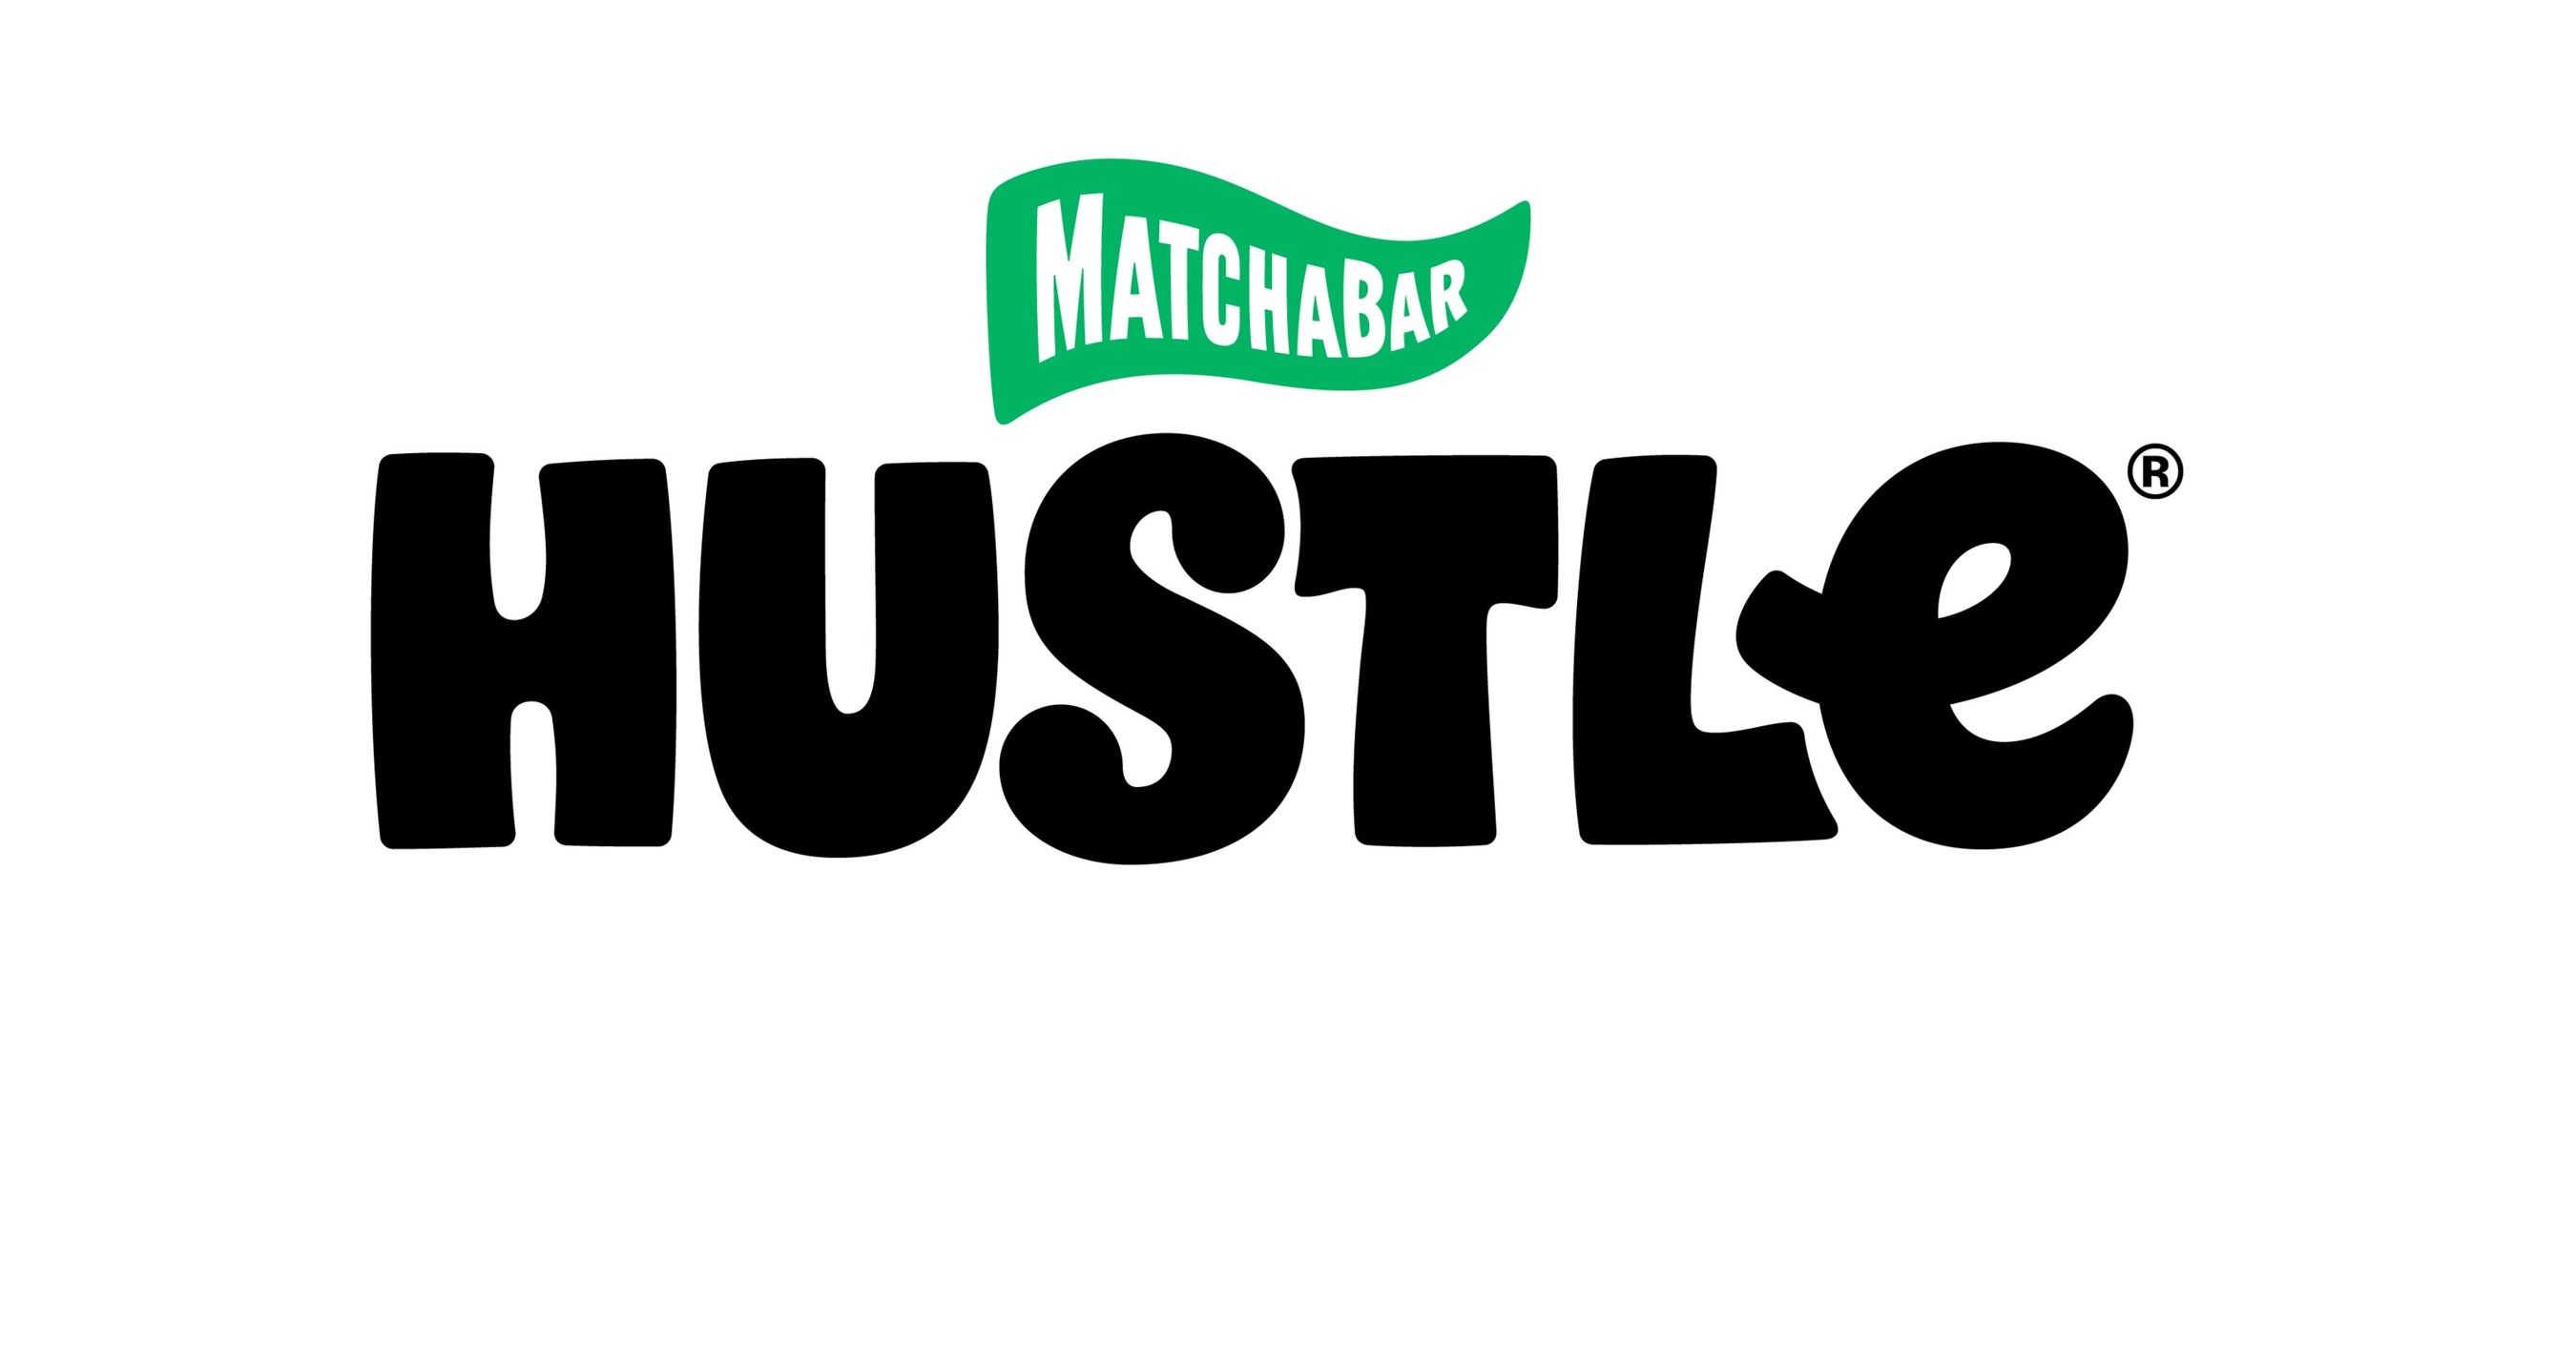 New Decade, New Hustle: MatchaBar Launches Rebrand with the Help ...